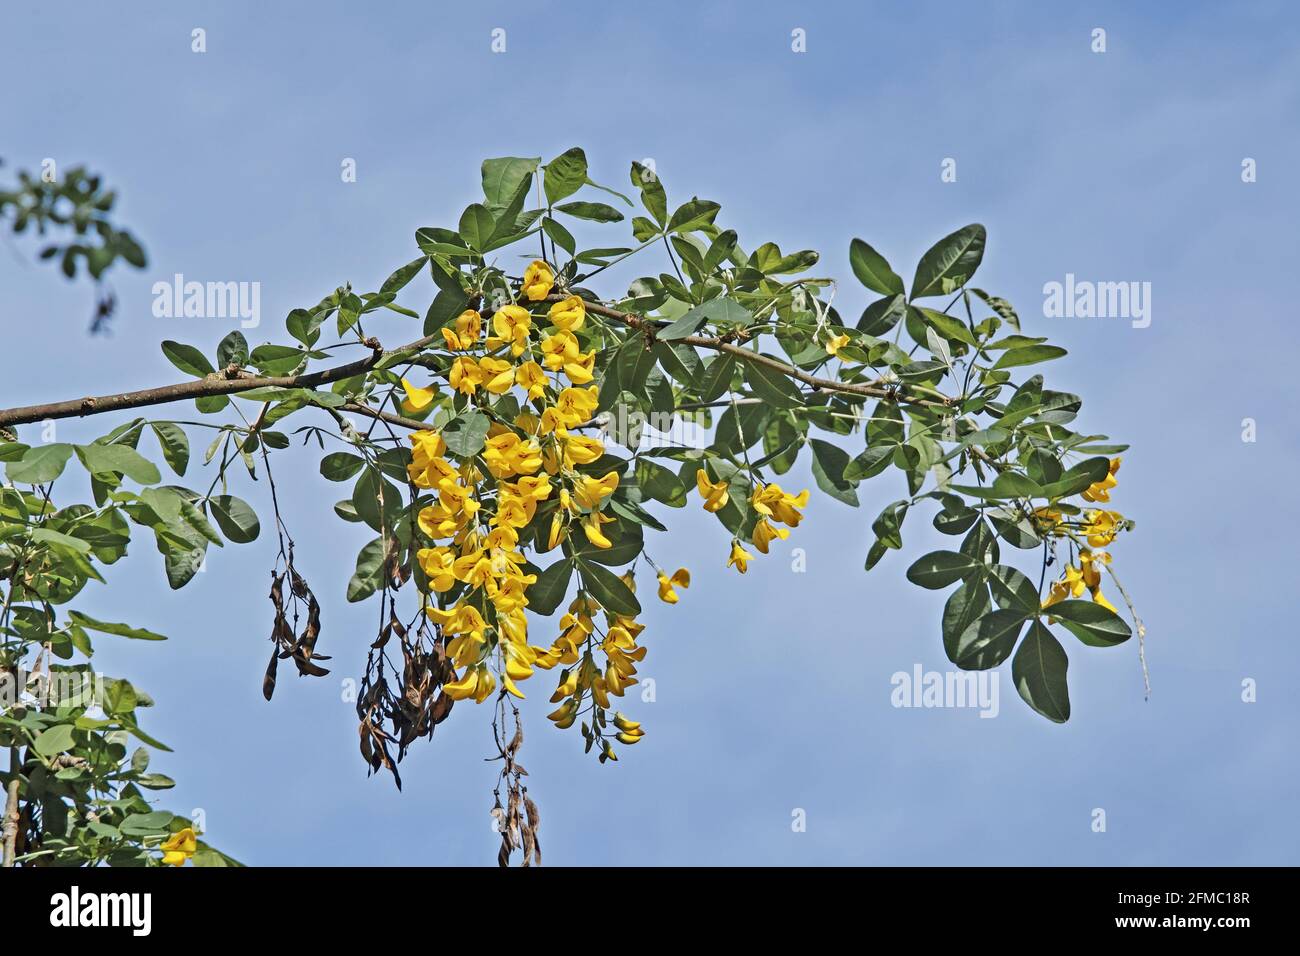 golden chain, common laburnum, branch with flowers and leaves in springtime Stock Photo